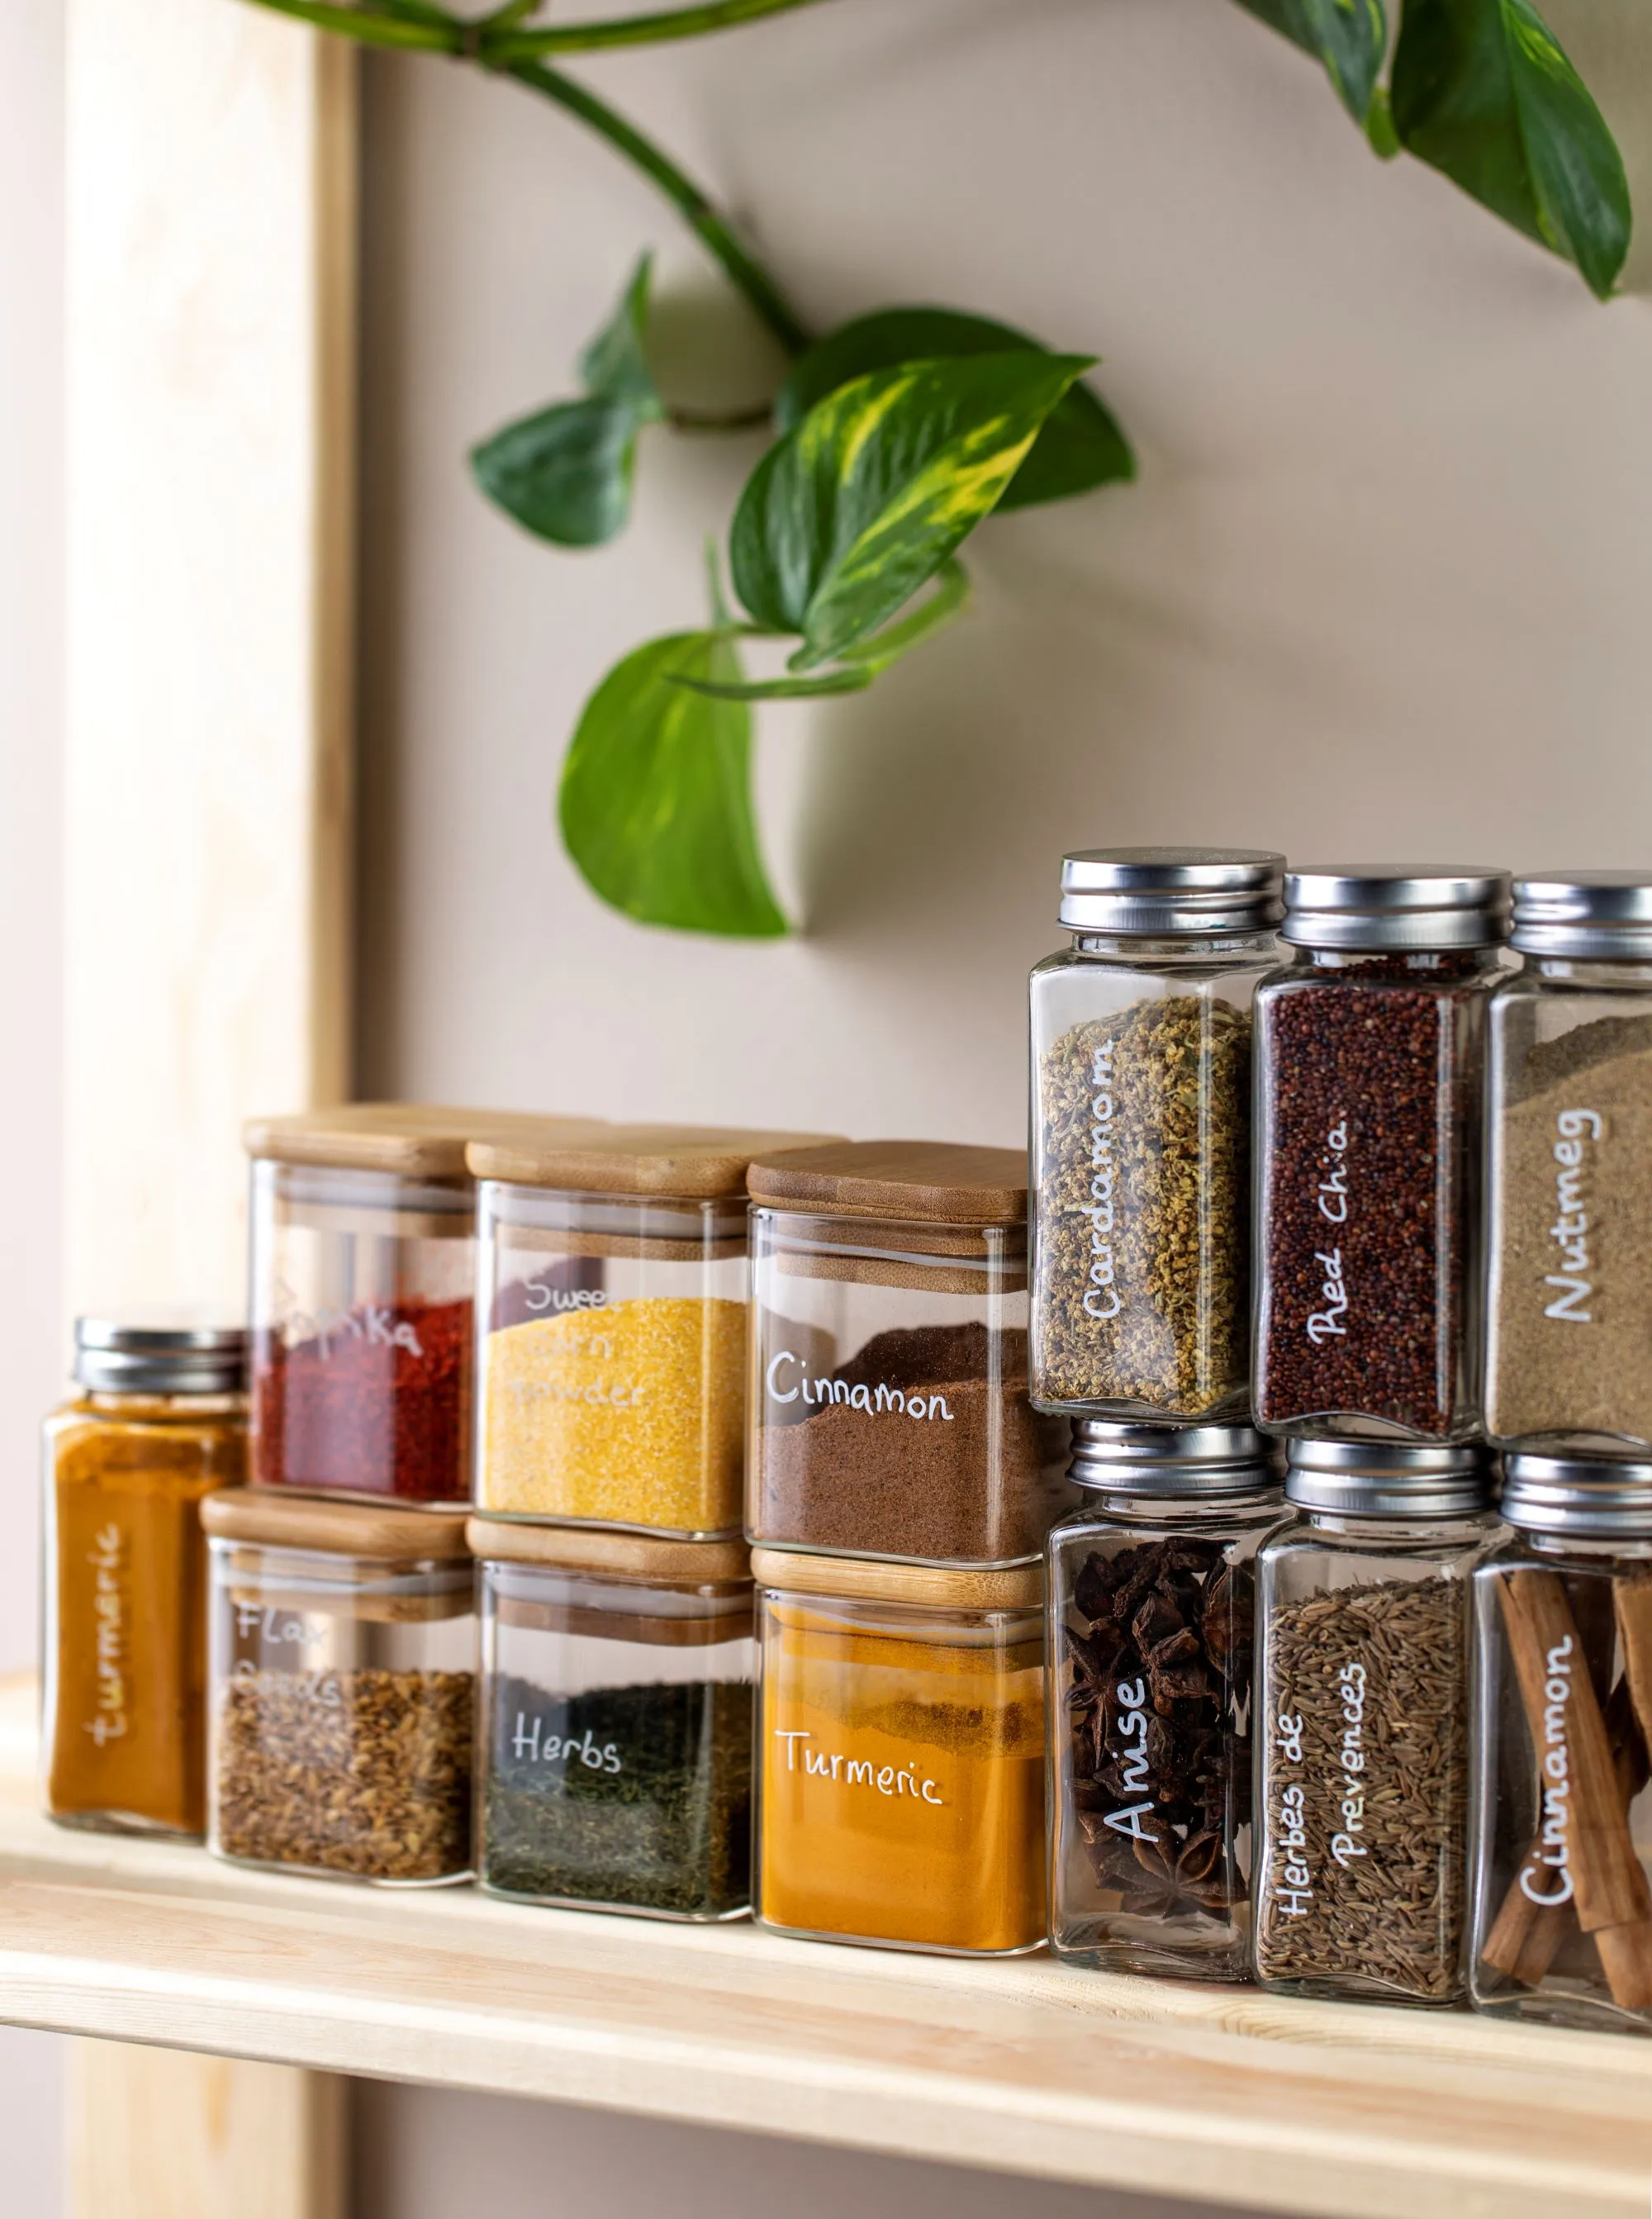 Labeling pantry items is especially helpful if you share a kitchen with others.